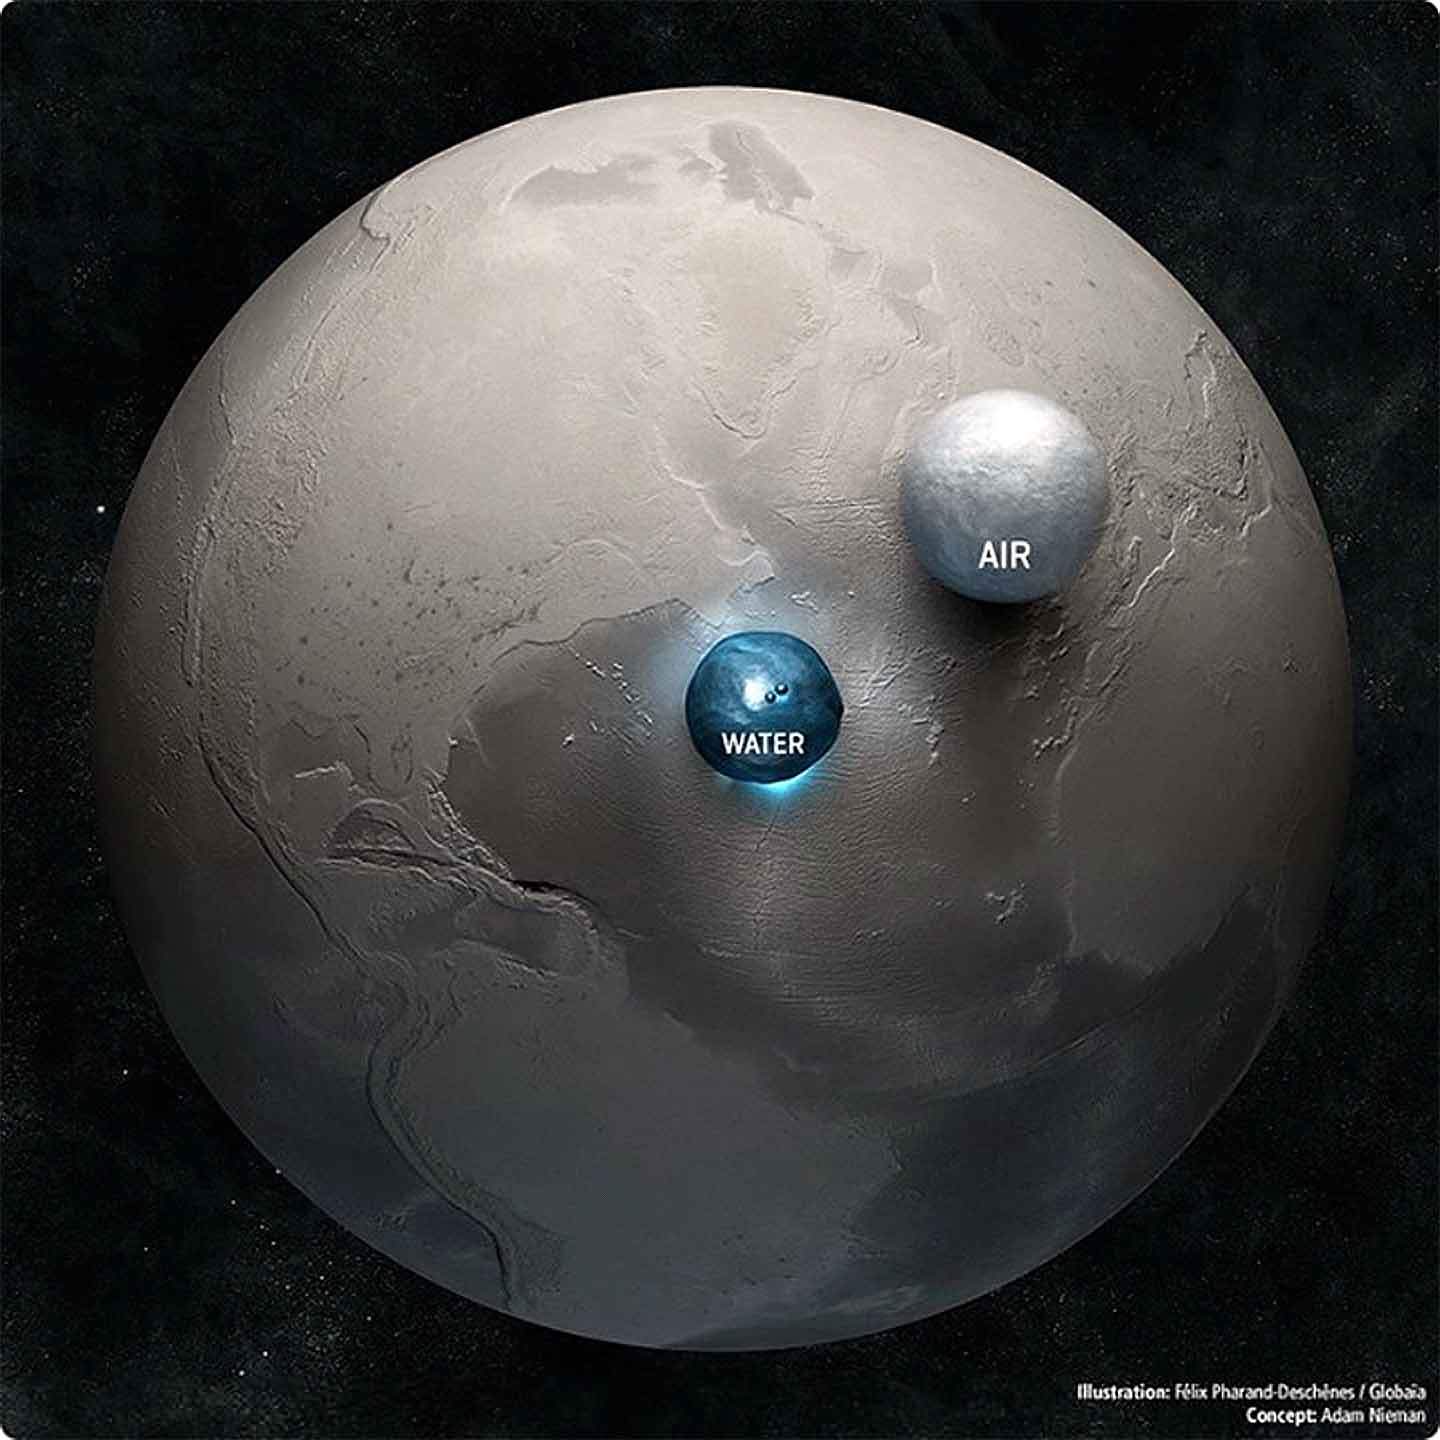 All the water and air of Earth